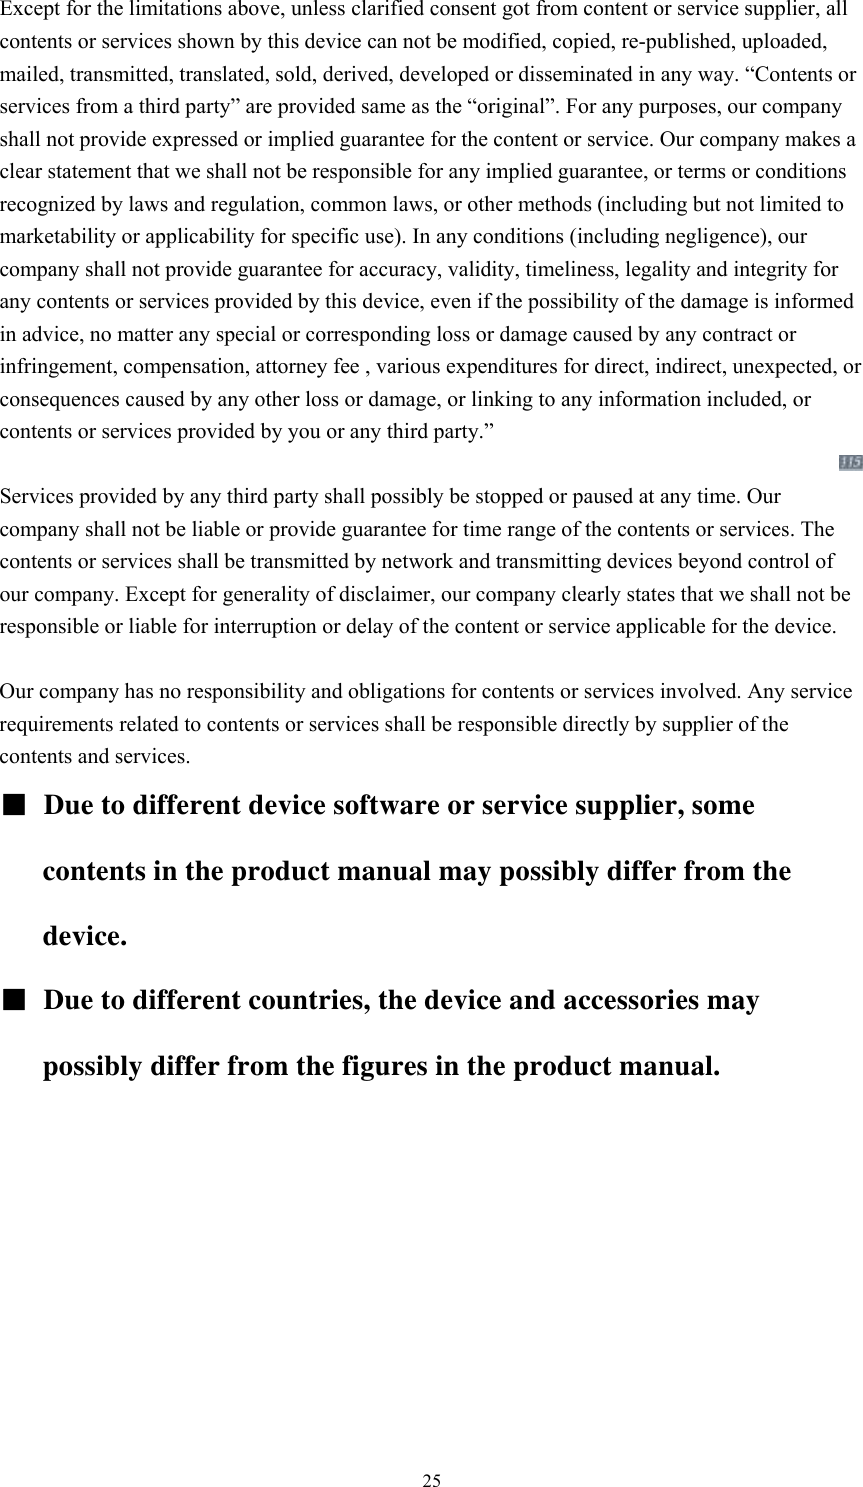  25Except for the limitations above, unless clarified consent got from content or service supplier, all contents or services shown by this device can not be modified, copied, re-published, uploaded, mailed, transmitted, translated, sold, derived, developed or disseminated in any way. “Contents or services from a third party” are provided same as the “original”. For any purposes, our company shall not provide expressed or implied guarantee for the content or service. Our company makes a clear statement that we shall not be responsible for any implied guarantee, or terms or conditions recognized by laws and regulation, common laws, or other methods (including but not limited to marketability or applicability for specific use). In any conditions (including negligence), our company shall not provide guarantee for accuracy, validity, timeliness, legality and integrity for any contents or services provided by this device, even if the possibility of the damage is informed in advice, no matter any special or corresponding loss or damage caused by any contract or infringement, compensation, attorney fee , various expenditures for direct, indirect, unexpected, or consequences caused by any other loss or damage, or linking to any information included, or contents or services provided by you or any third party.”    Services provided by any third party shall possibly be stopped or paused at any time. Our company shall not be liable or provide guarantee for time range of the contents or services. The contents or services shall be transmitted by network and transmitting devices beyond control of our company. Except for generality of disclaimer, our company clearly states that we shall not be responsible or liable for interruption or delay of the content or service applicable for the device.     Our company has no responsibility and obligations for contents or services involved. Any service requirements related to contents or services shall be responsible directly by supplier of the contents and services.     ■ Due to different device software or service supplier, some contents in the product manual may possibly differ from the device.  ■  Due to different countries, the device and accessories may possibly differ from the figures in the product manual.   